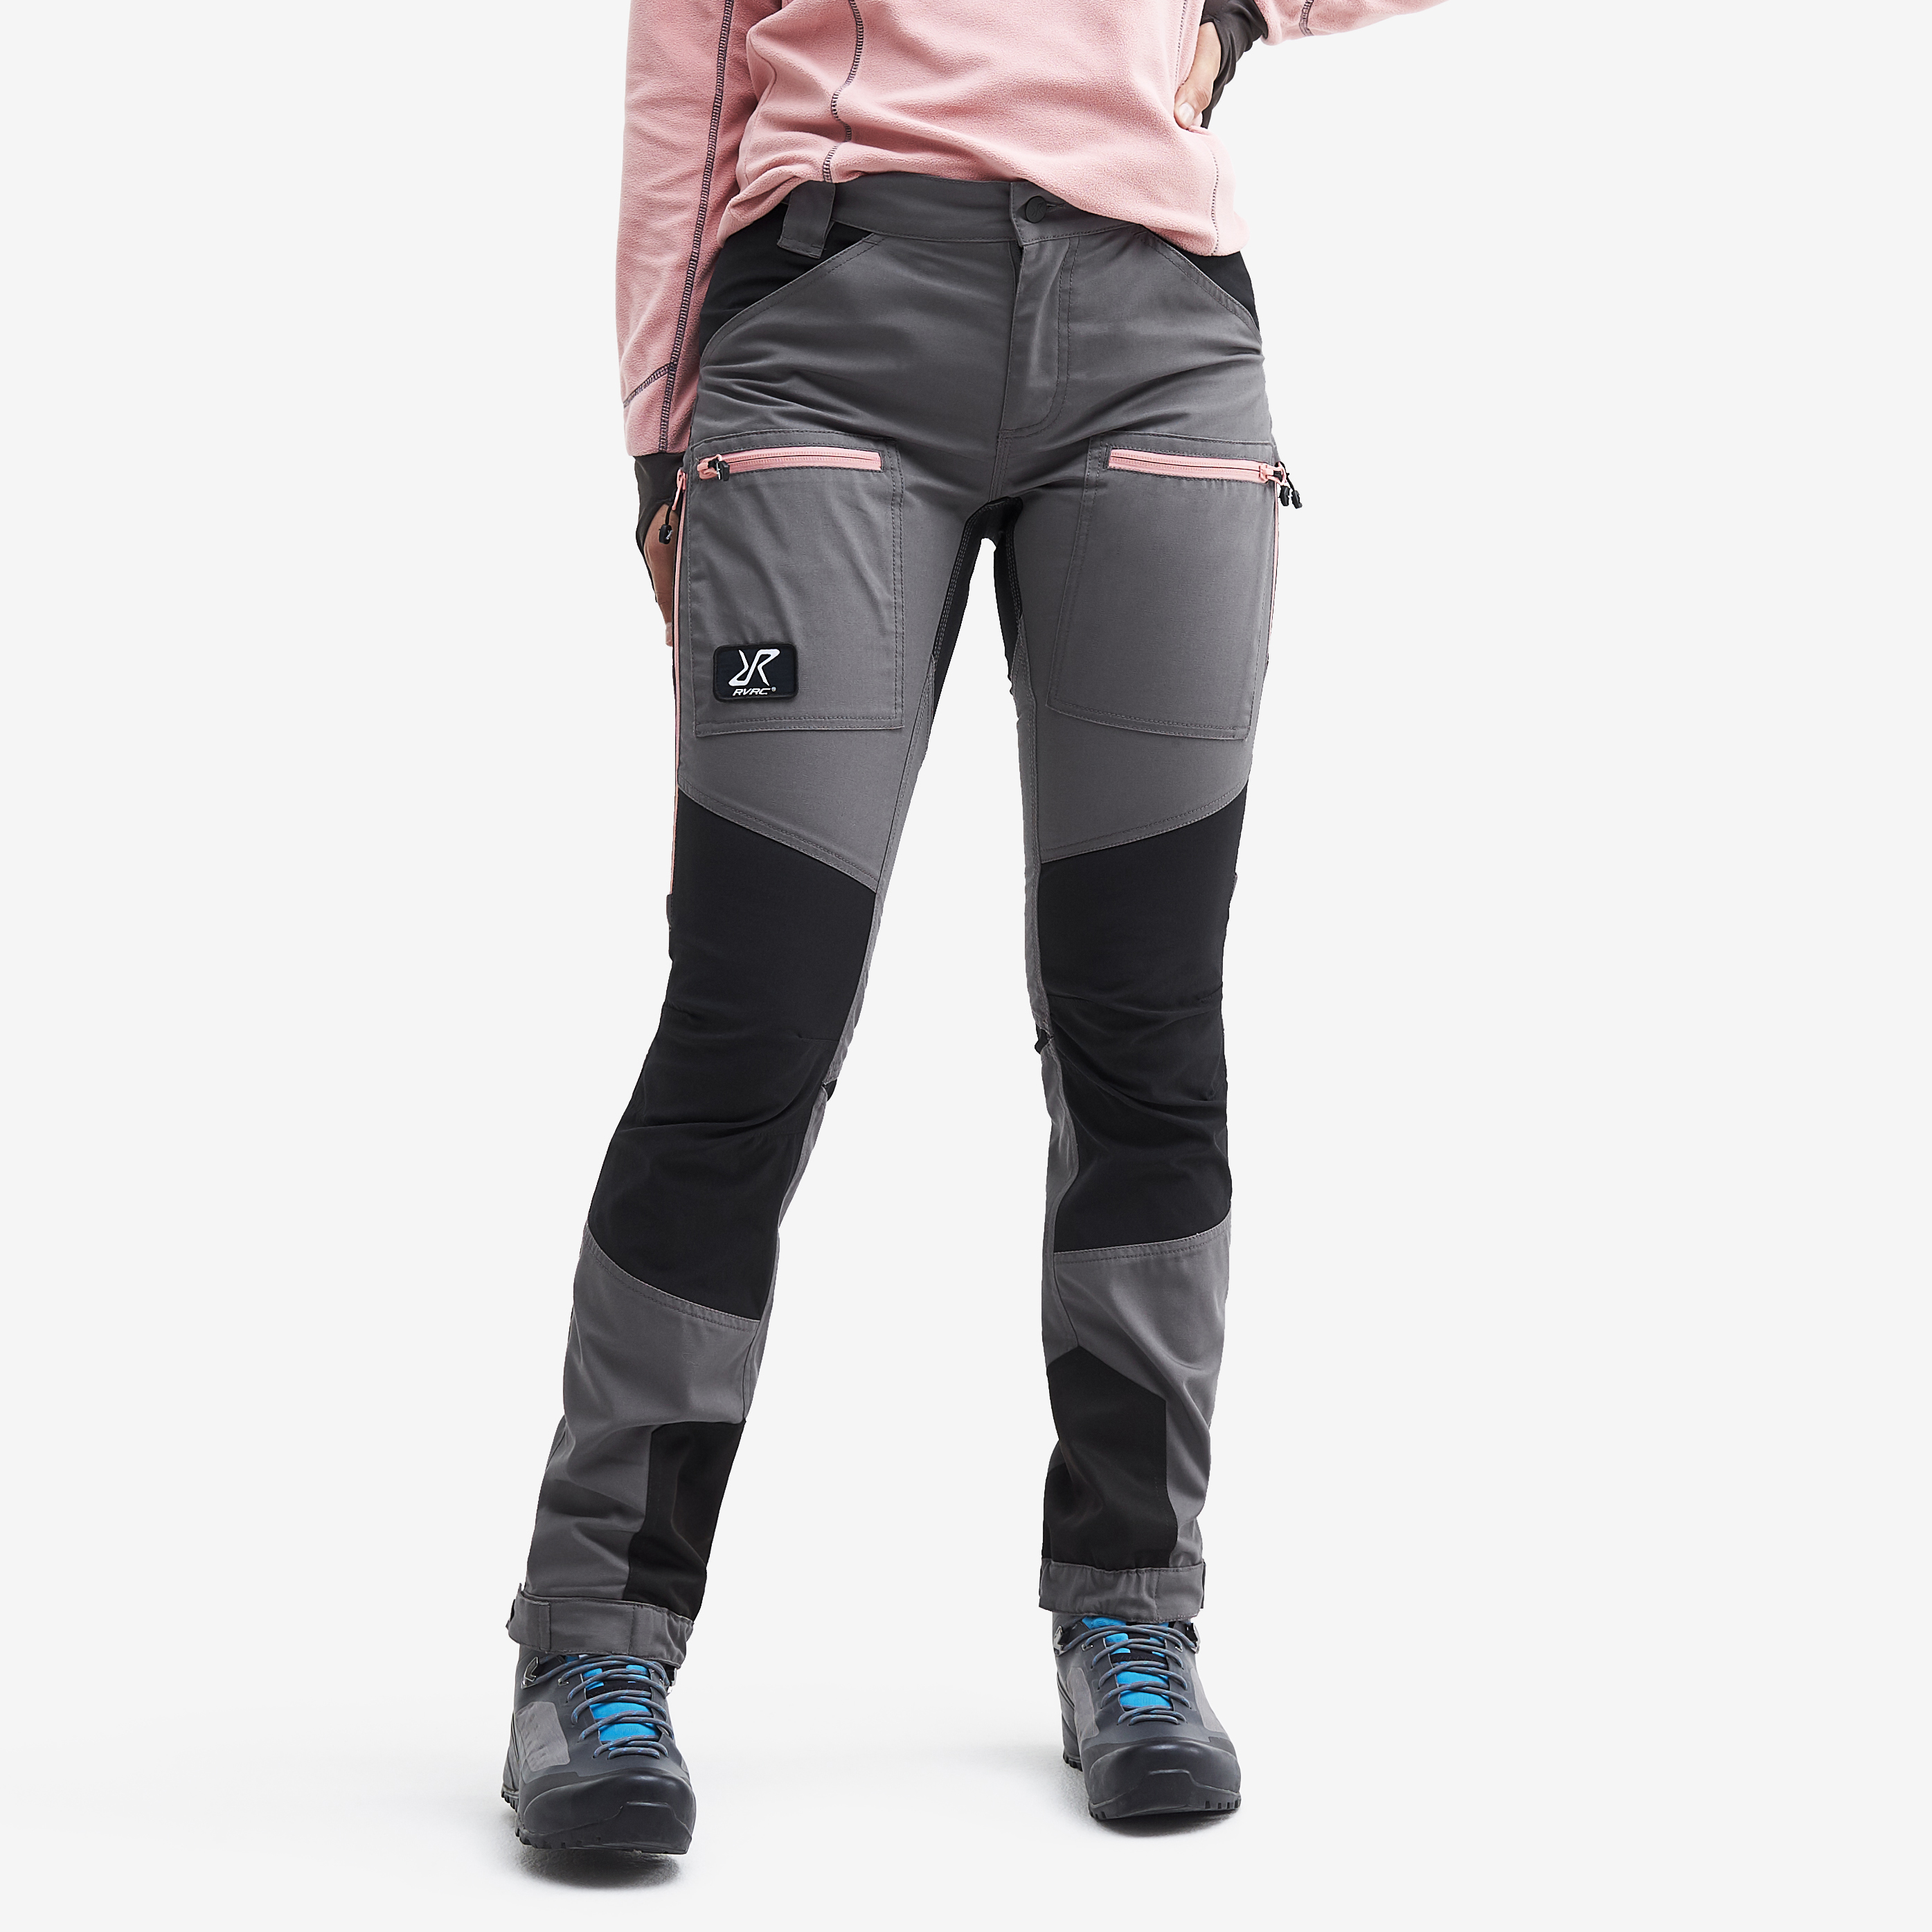 Nordwand Pro hiking pants for women in light grey